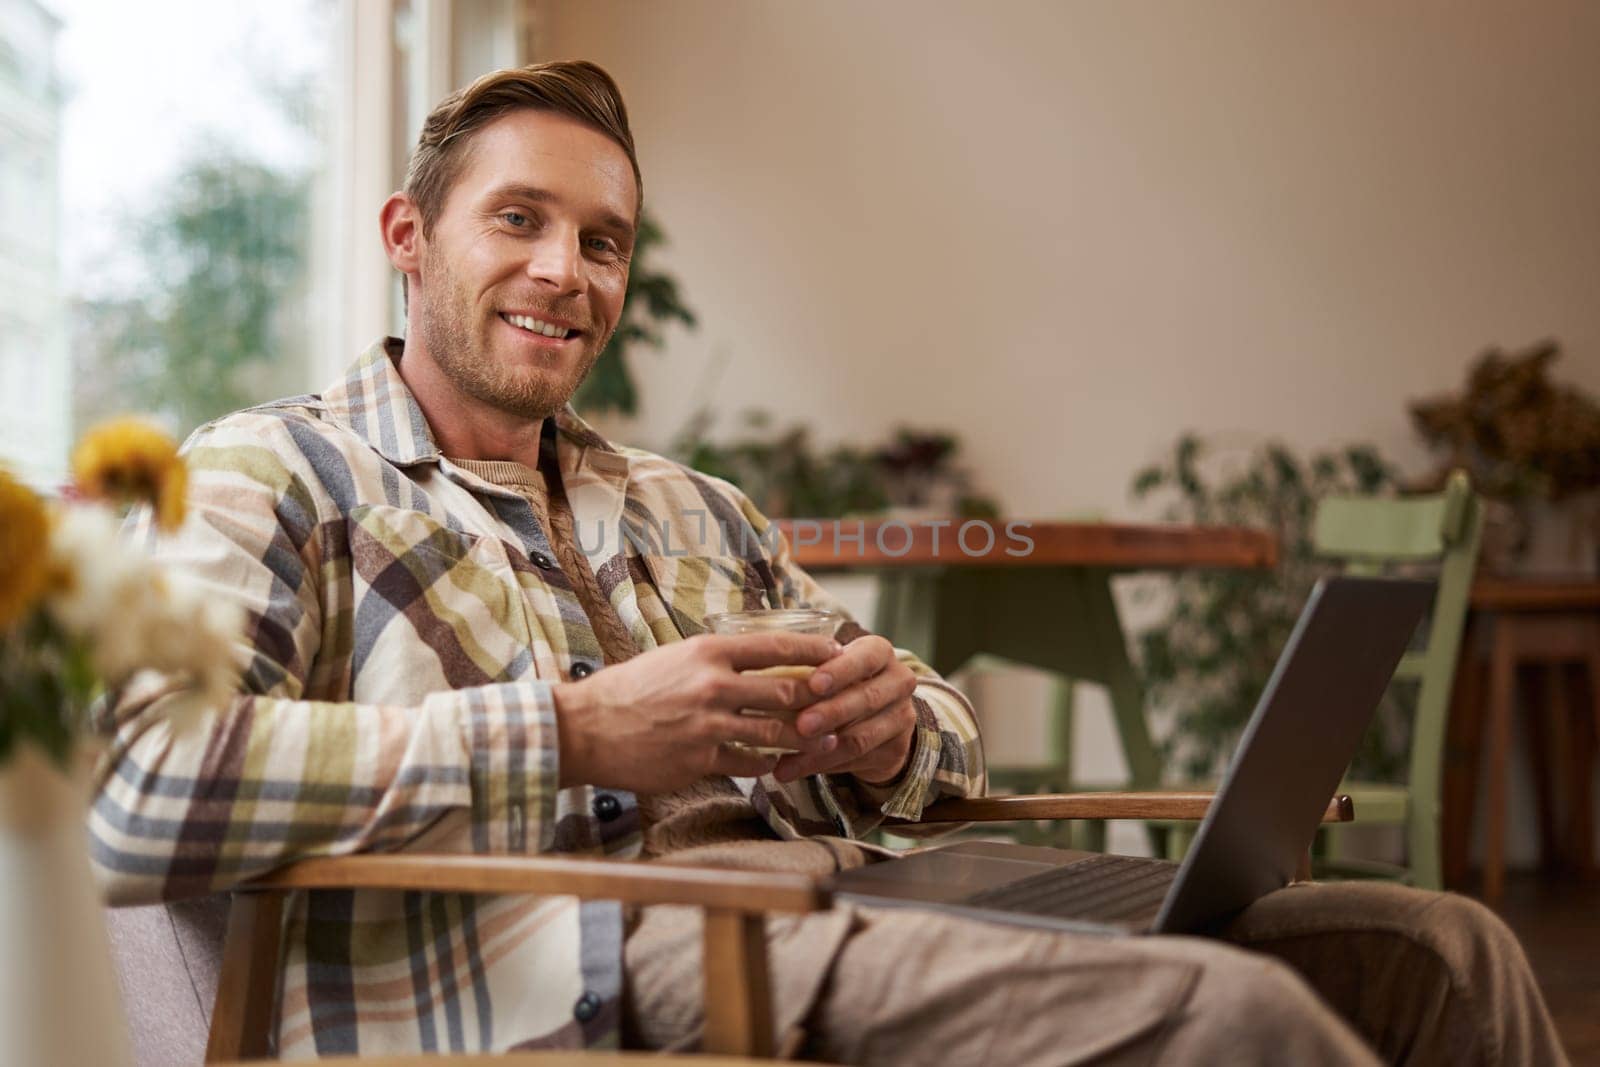 Handsome young professional, businessman sitting in cafe with glass of coffee and working on laptop, searching for inspiration outside of office workspace.